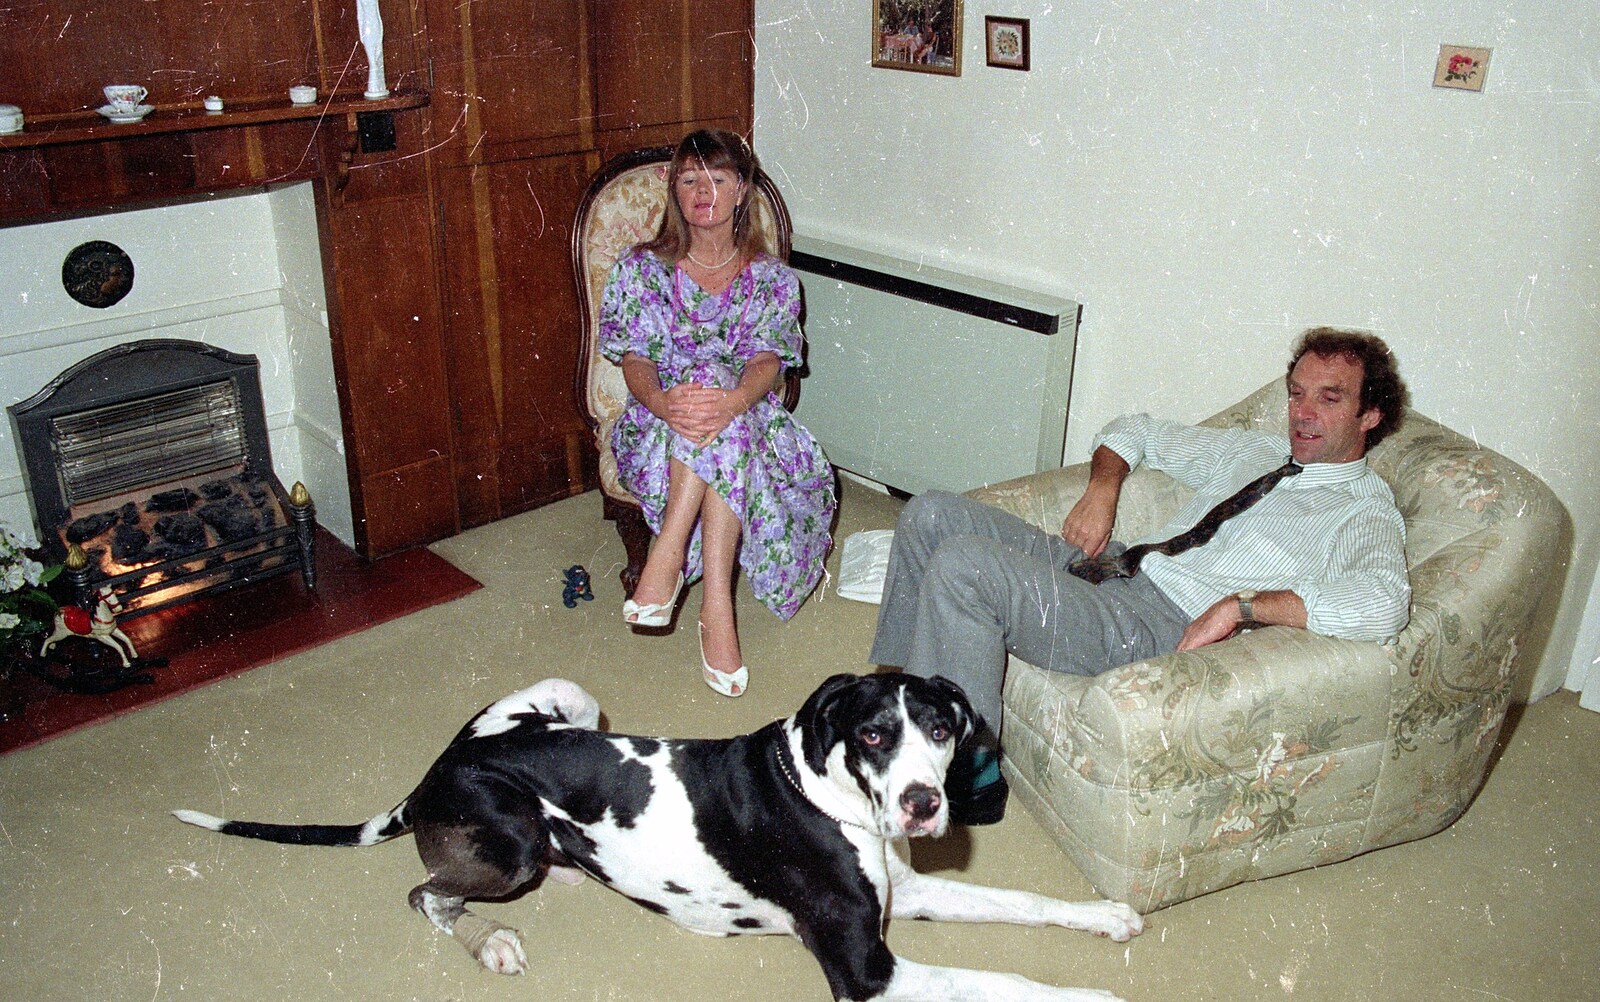 Mother, Mike and Boley from A Trip to Bracken Way, Walkford, Dorset - 8th September 1987